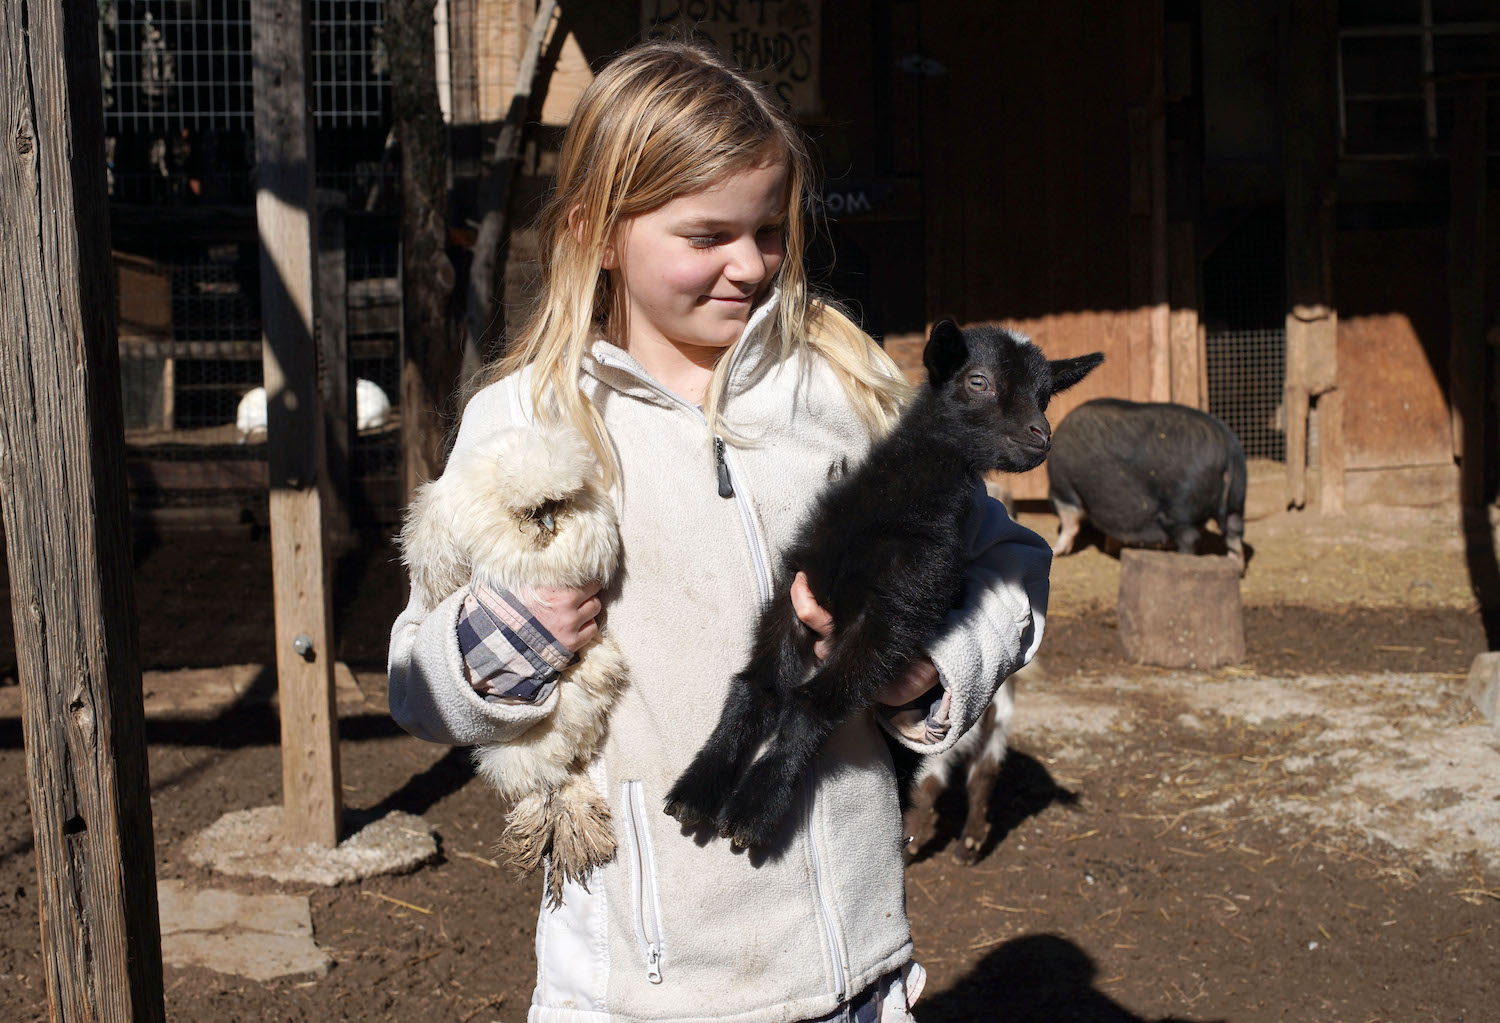 San Diego homeschooling program featuring Fiona Coghill, 10, holdsing her favorite silkie chicken and the baby goat she and her sister have to feed several times a day in the petting zoo where she and mother and sister live in the town of Wynola, CA.